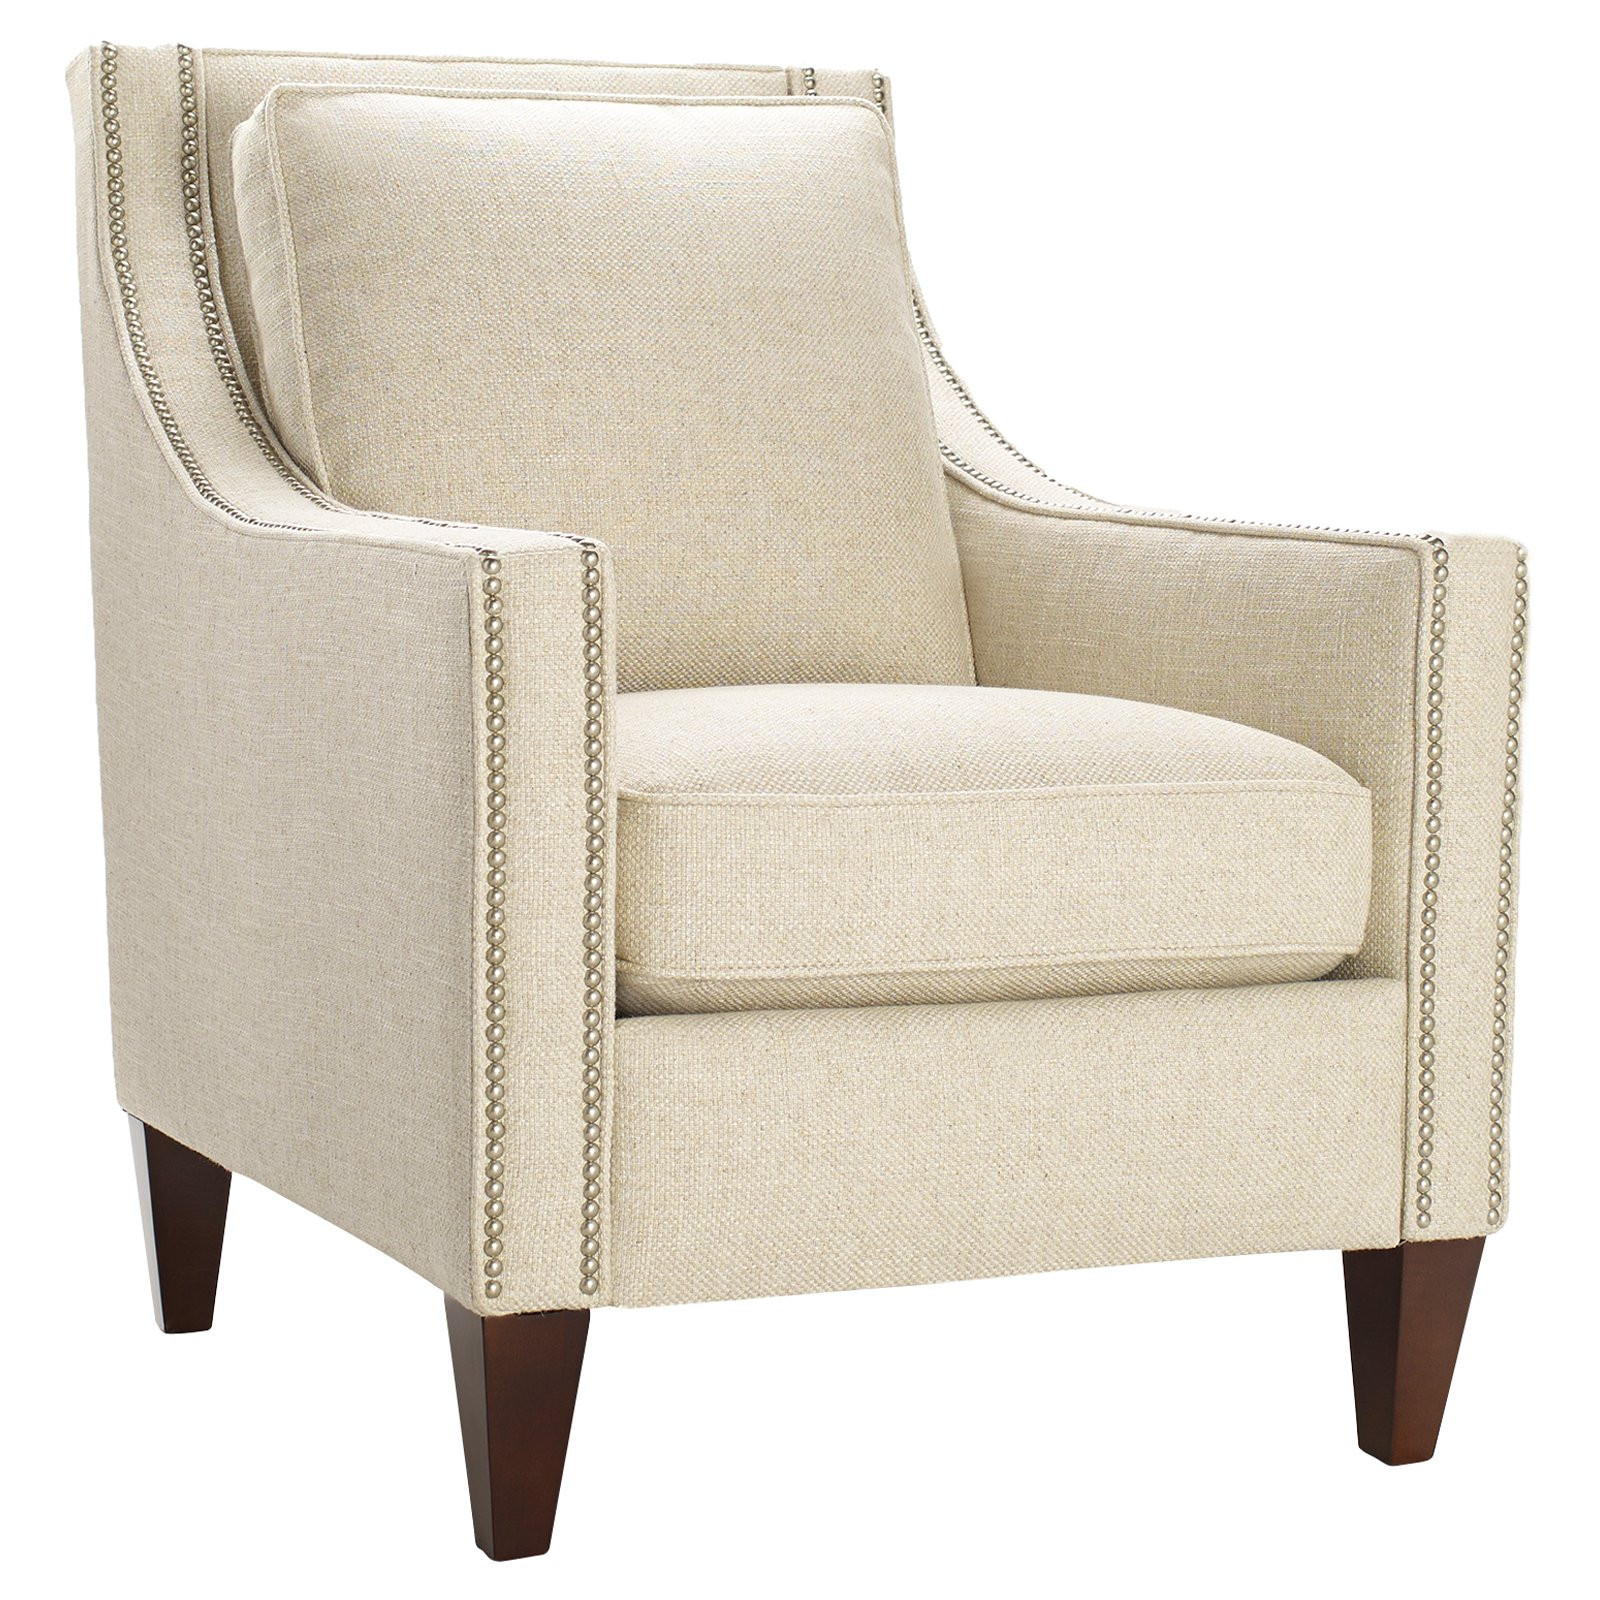 White Living Room Chair
 Cool Accent Chairs – HomesFeed